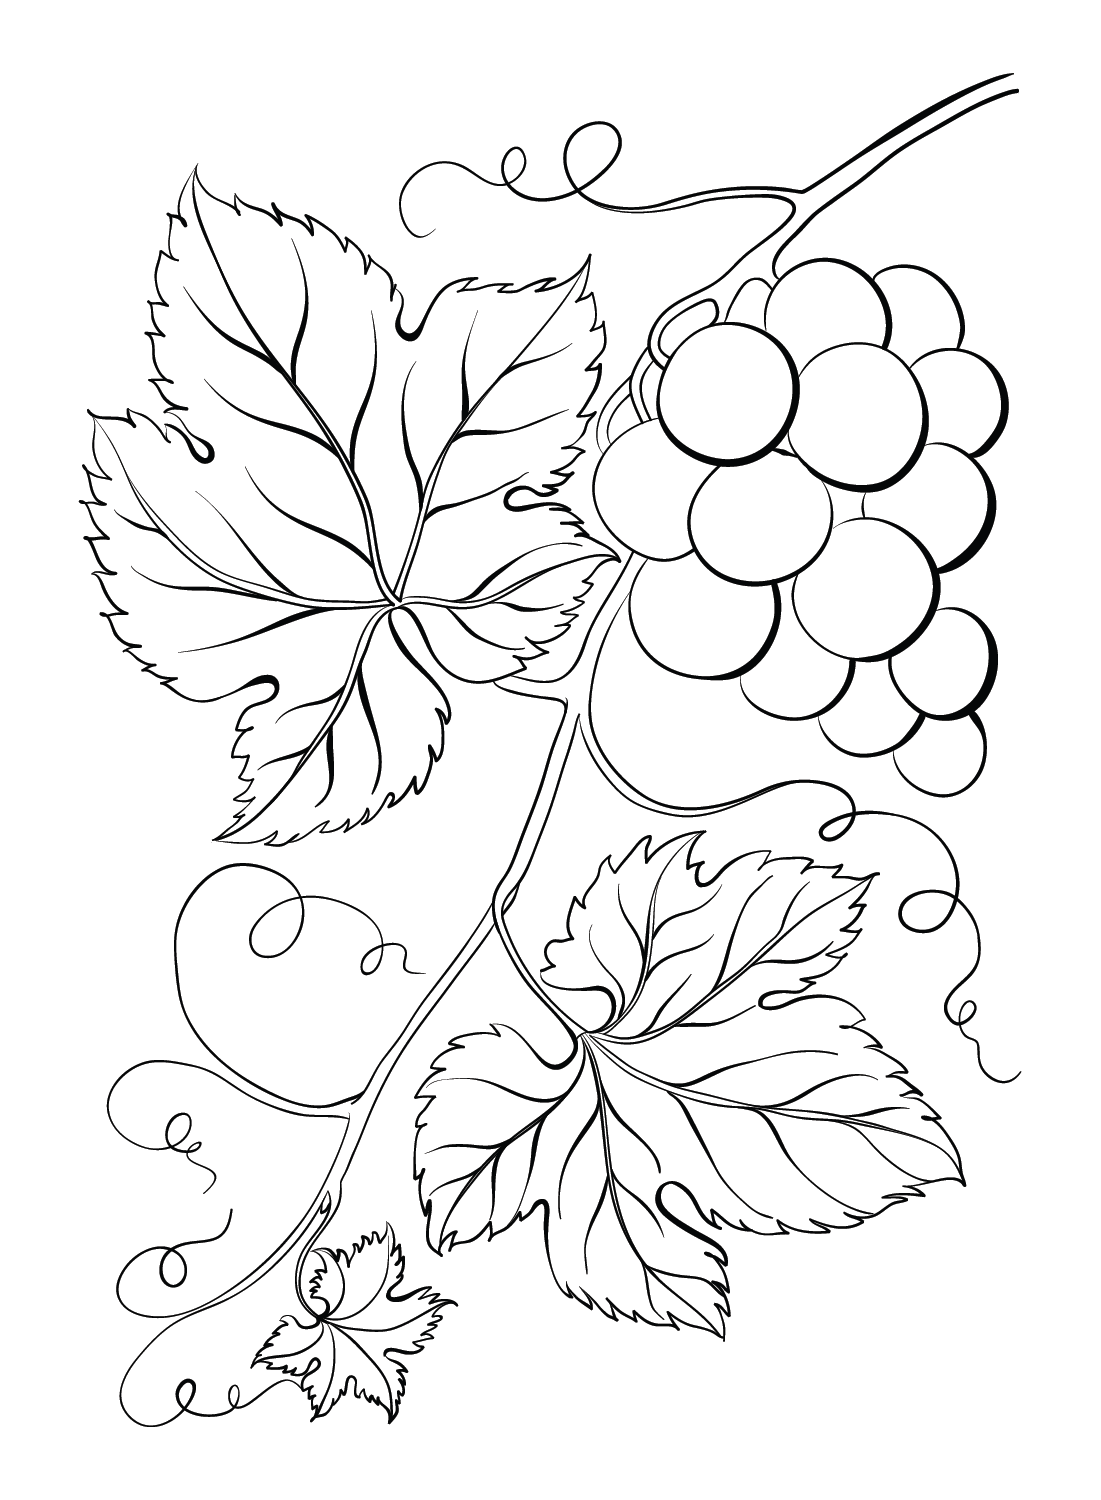 Free Grapes Coloring Page